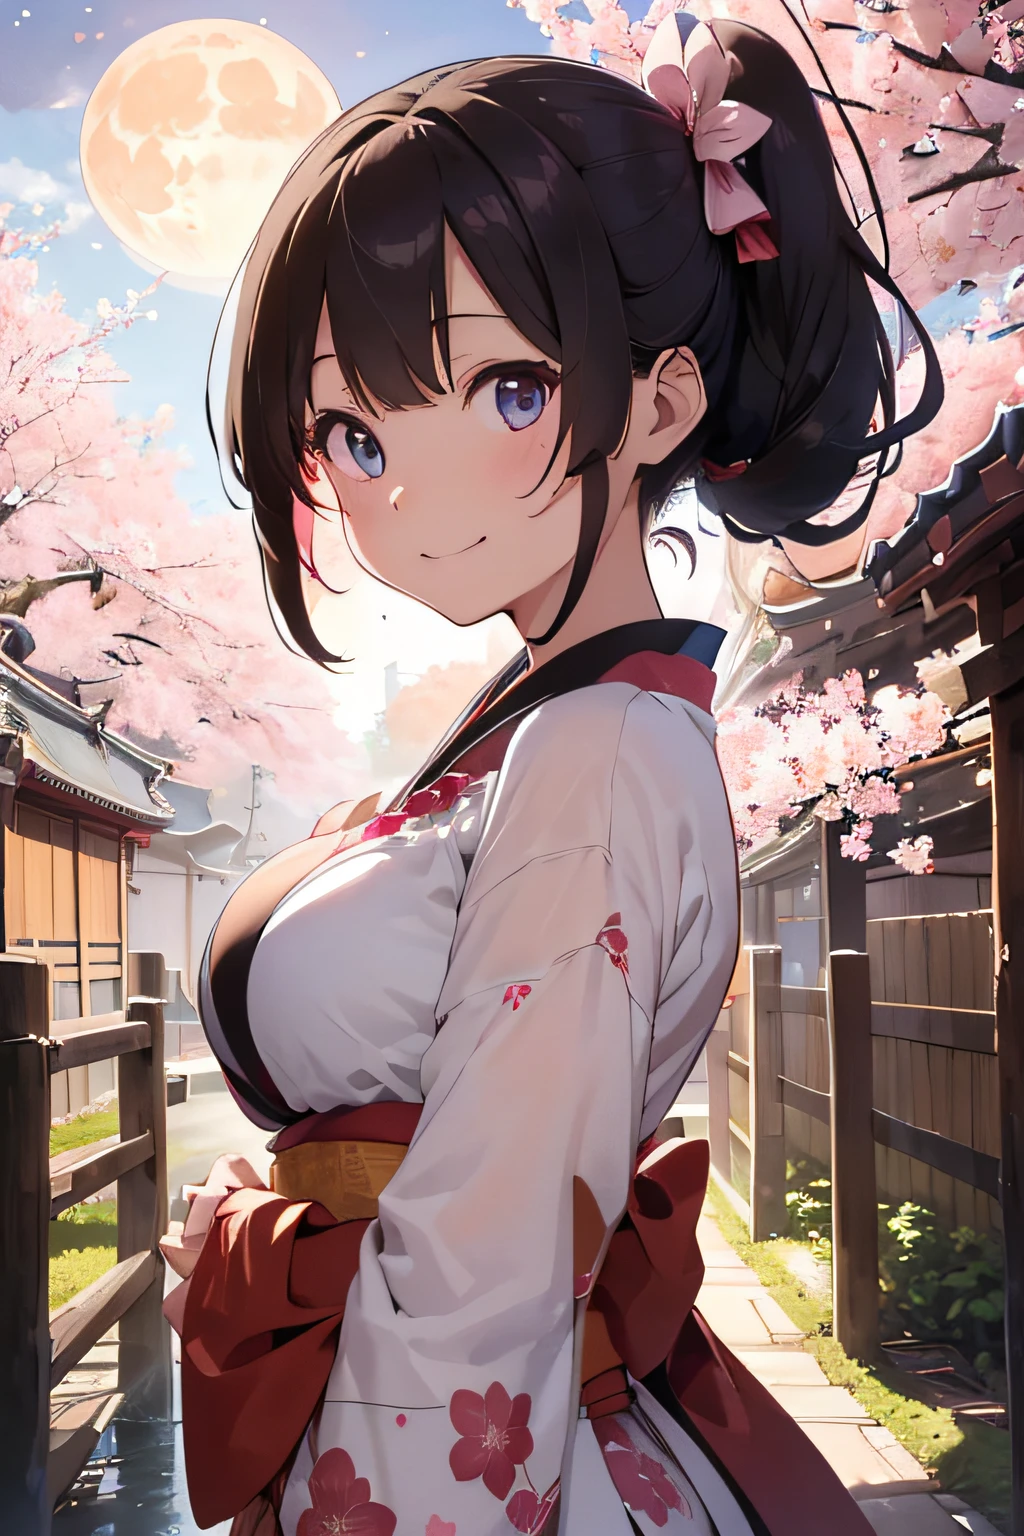 Big Tits,Kimono with cleavage visible,Blue eyes,Smiling smile,absurderes,hight resolution,Ultra-detail,(Accurate and unparalleled illustrations:1.3),Brown hair,poneyTail,arms behind back,Red ruffled kimono:1.3,Pink ribbon:1.1,Illuminated cherry blossoms:1.3,(temples:1.2),(fullmoon:1.3)